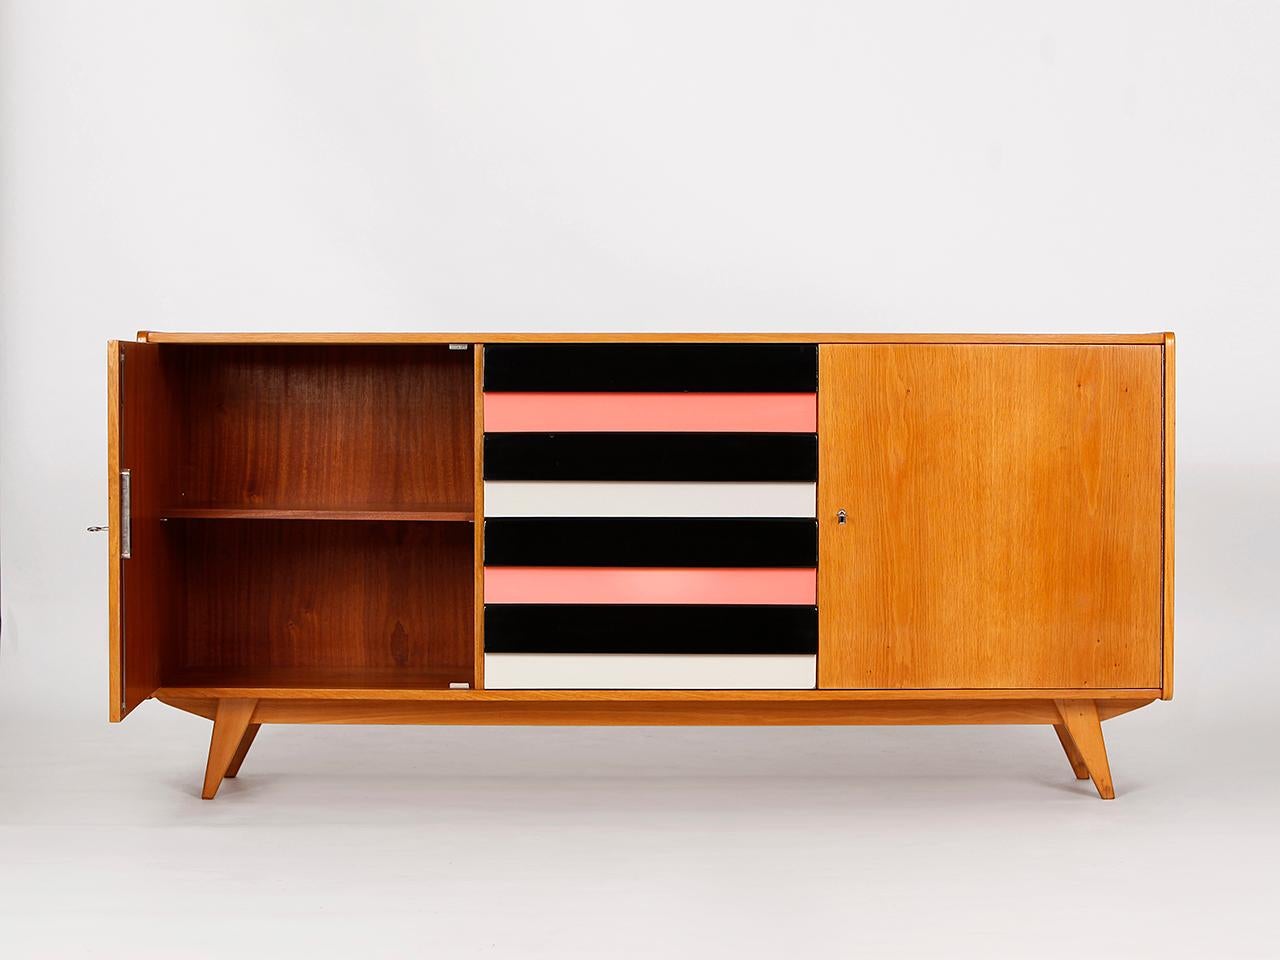 This model U-460 sideboard was designed by Jiri Jiroutek for Interier Praha in former Czechoslovakia. Produced in the 1960s. Completely restored. Excellent condition. It is an early model with wooden drawers.